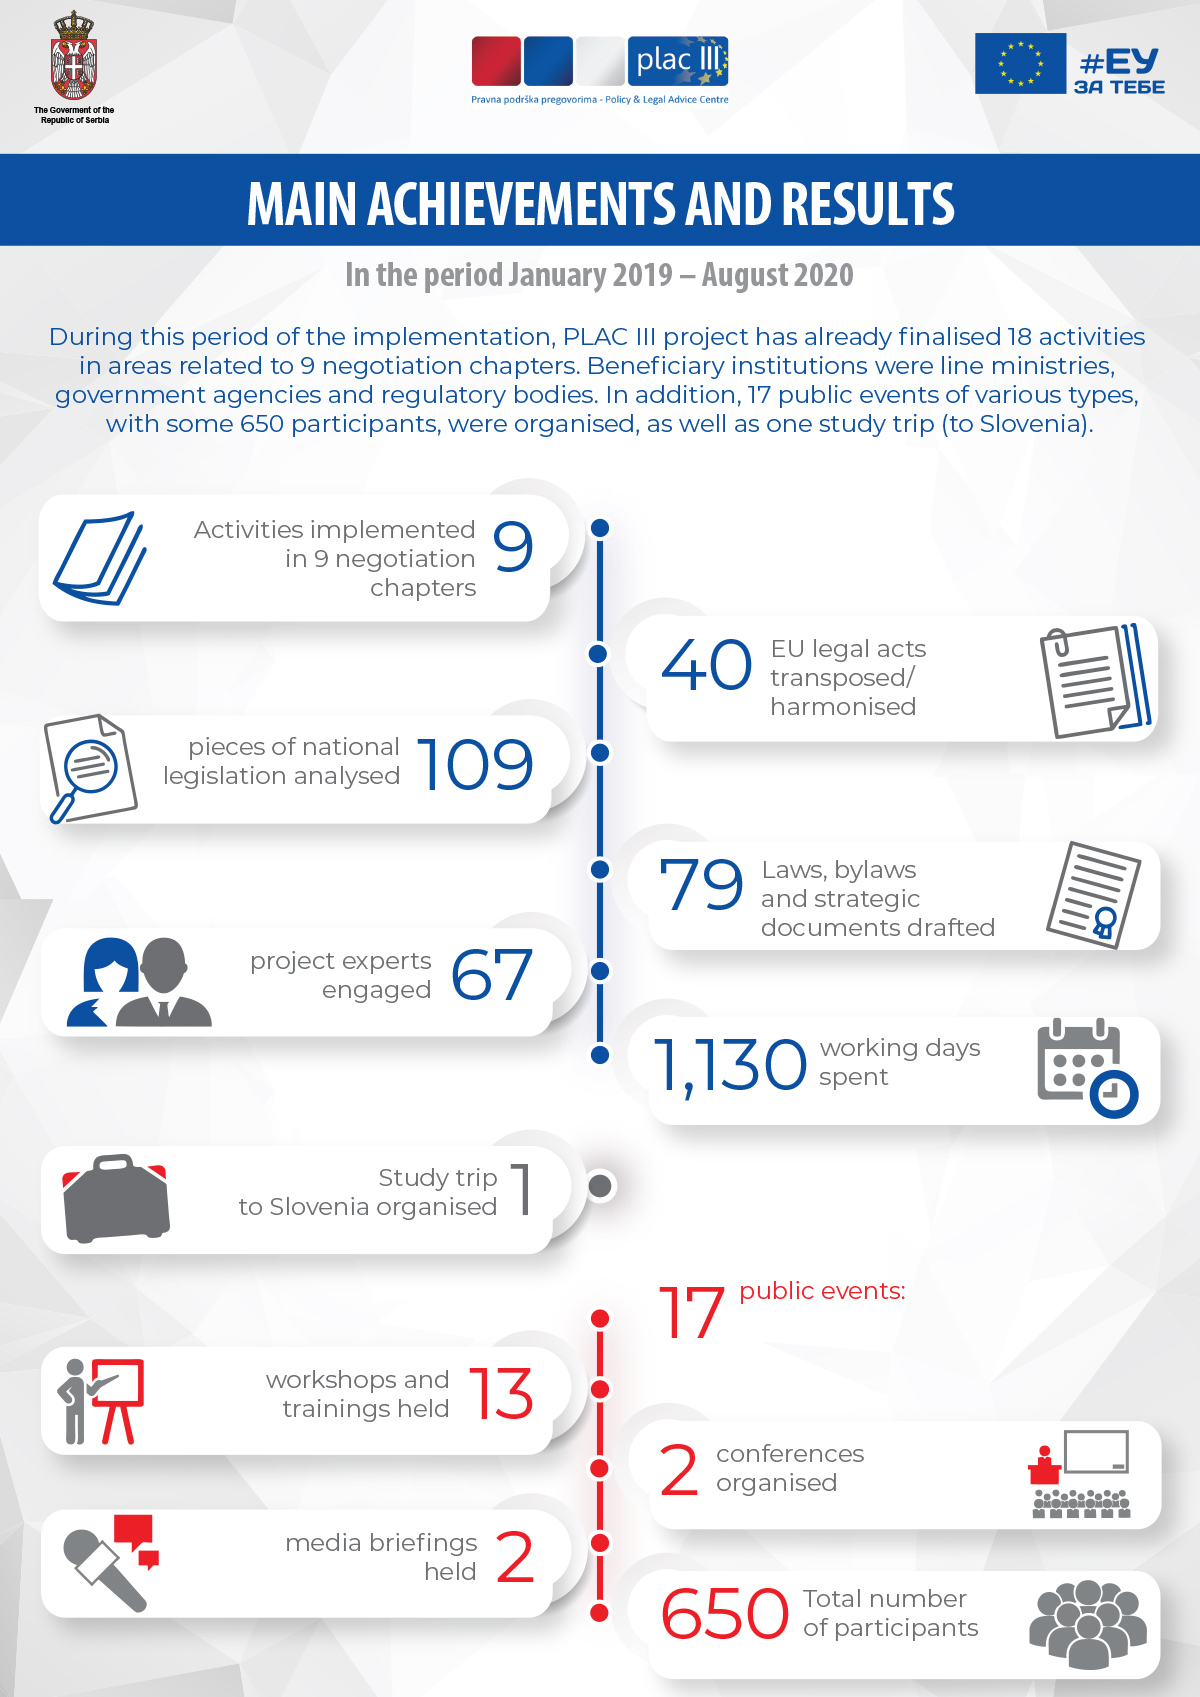 INFO GRAPHIC 3 – Main achievements and results in the period January 2019 – August 2020